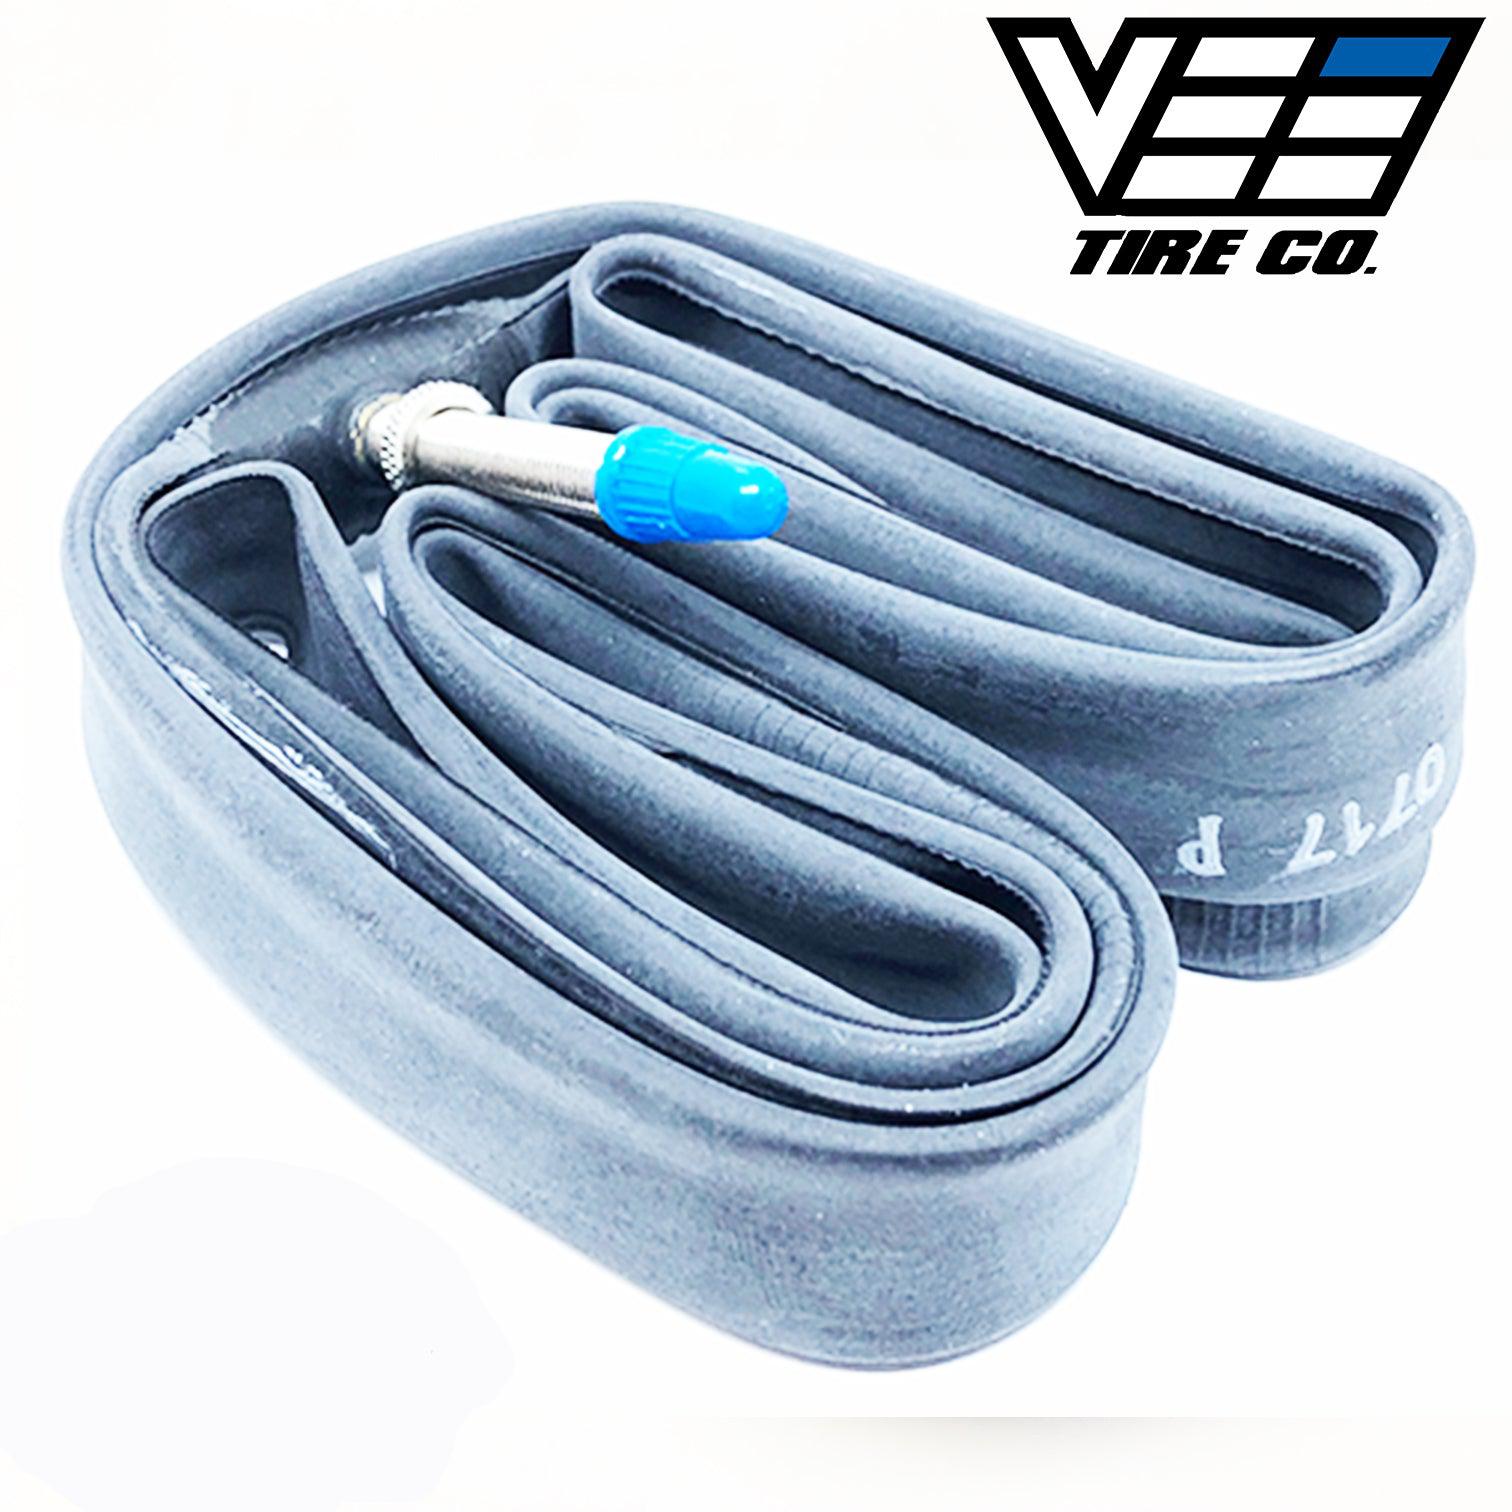 Vee 24 X 1-1/8 Inch Tube (FV 40mm) tire co offers a wide range of tubes equipped with quality valves for reliable performance on every ride. Explore our selection of tube options to find the perfect fit for your bike.